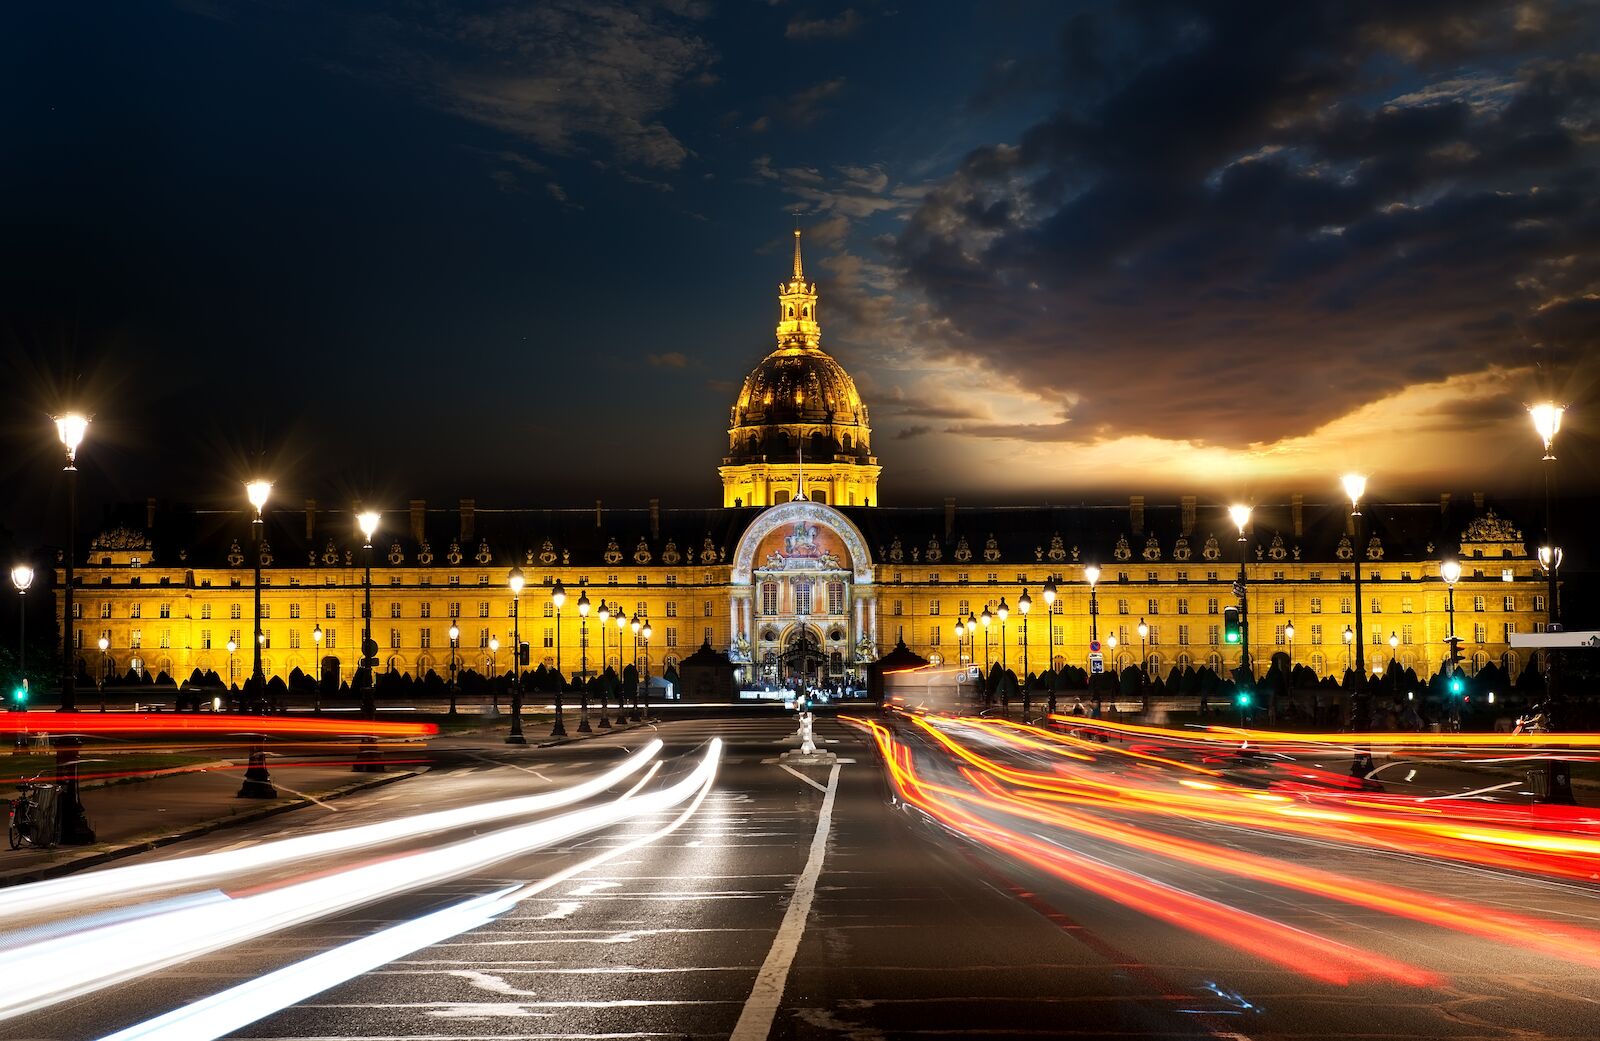 Night at Les Invalides is one of the best events in Paris